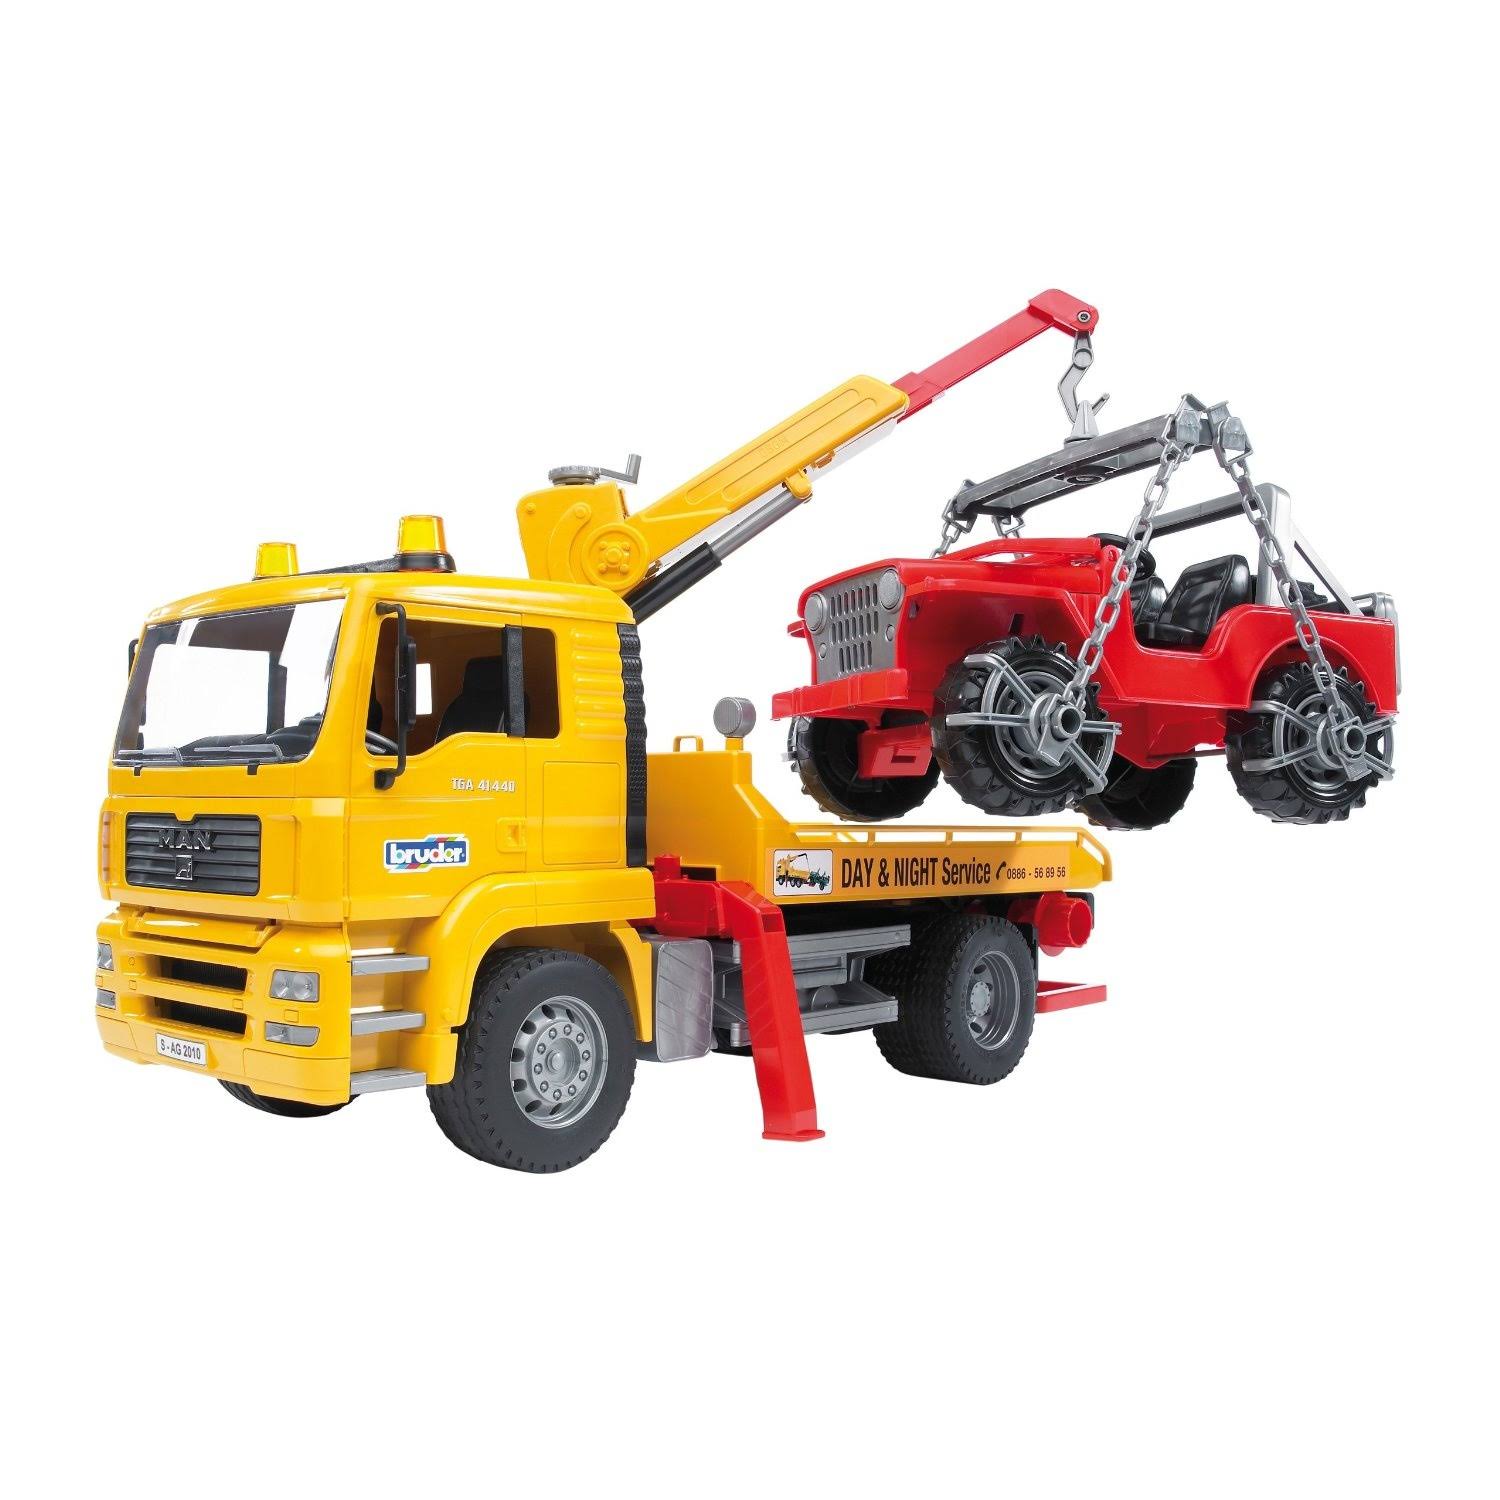 Bruder Man Tga Tow Truck with Cross Country Vehicle Toy